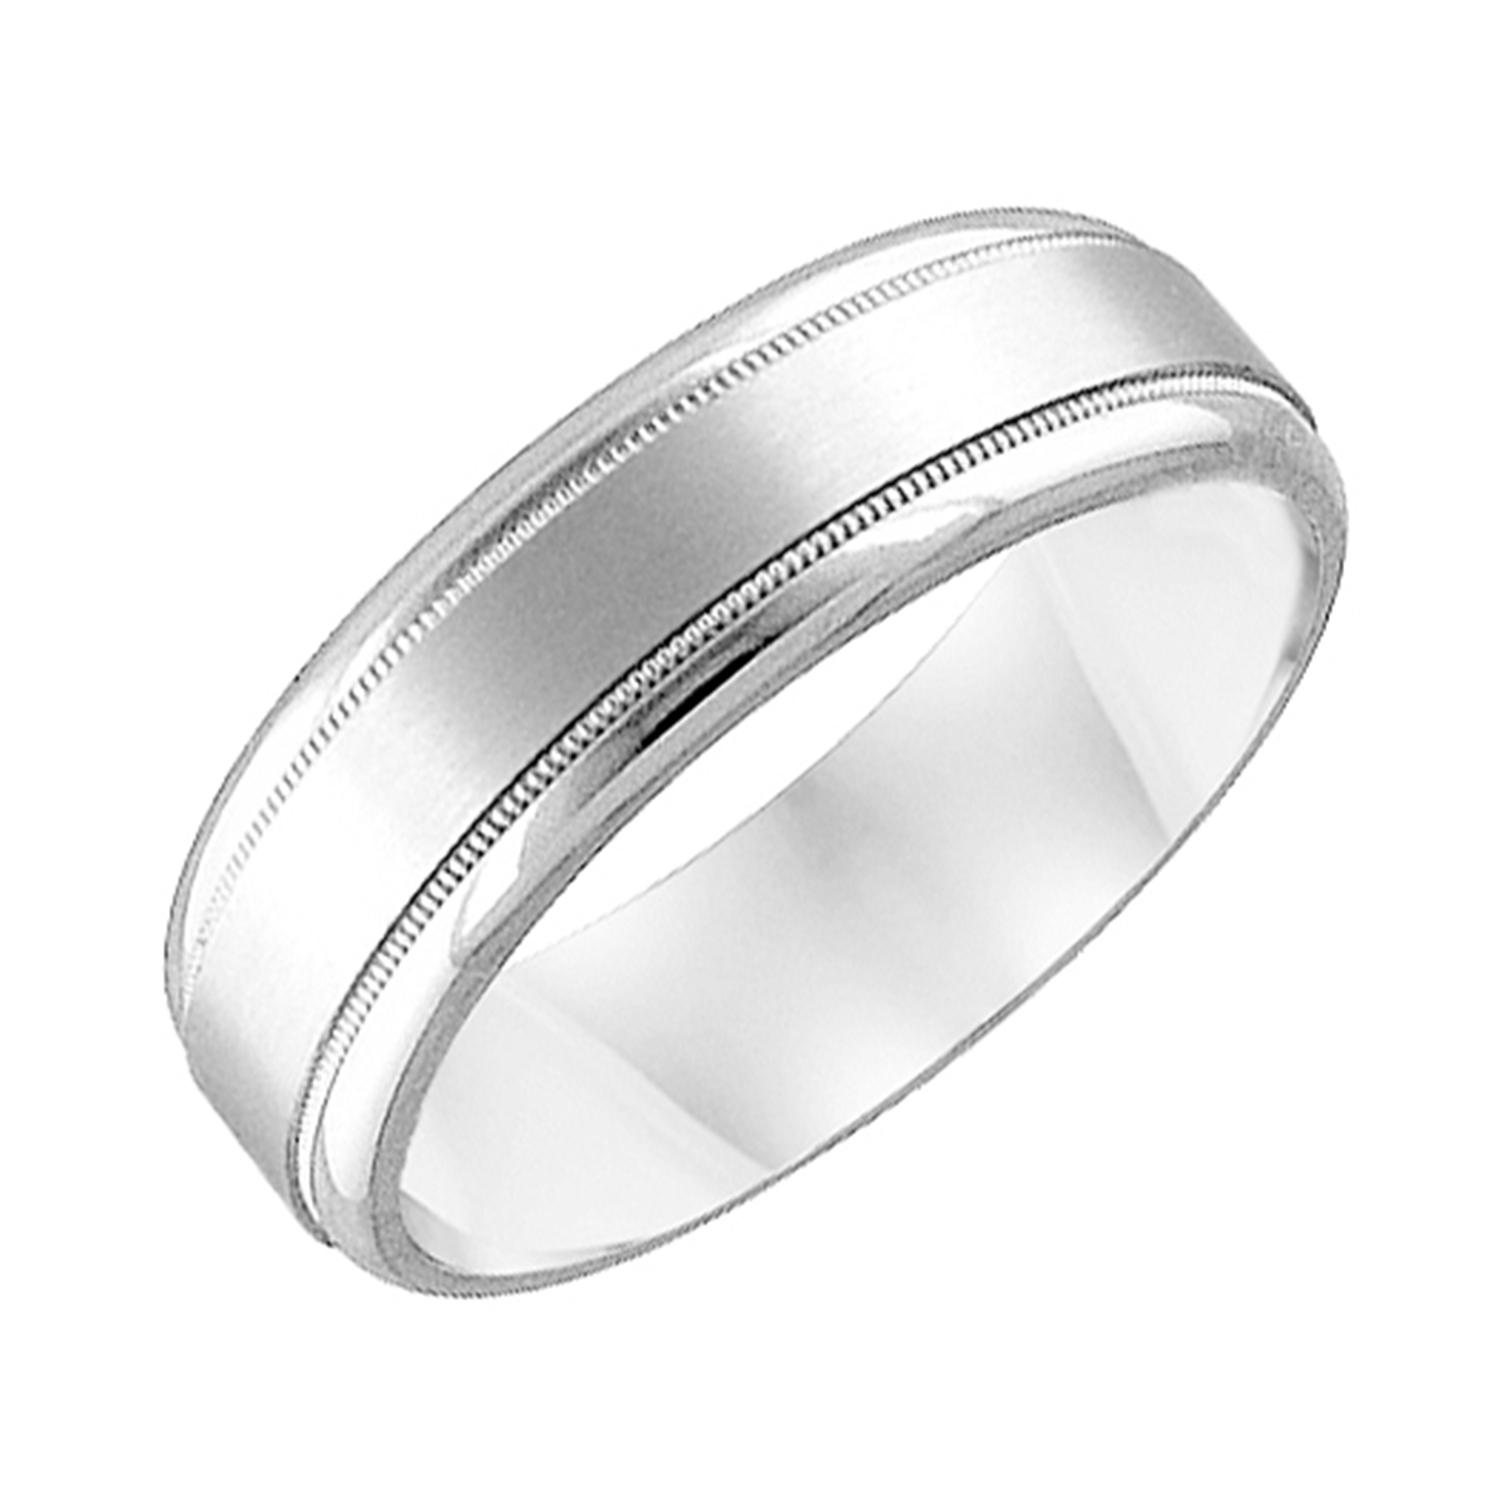 Wedding Band With Rolled Edge